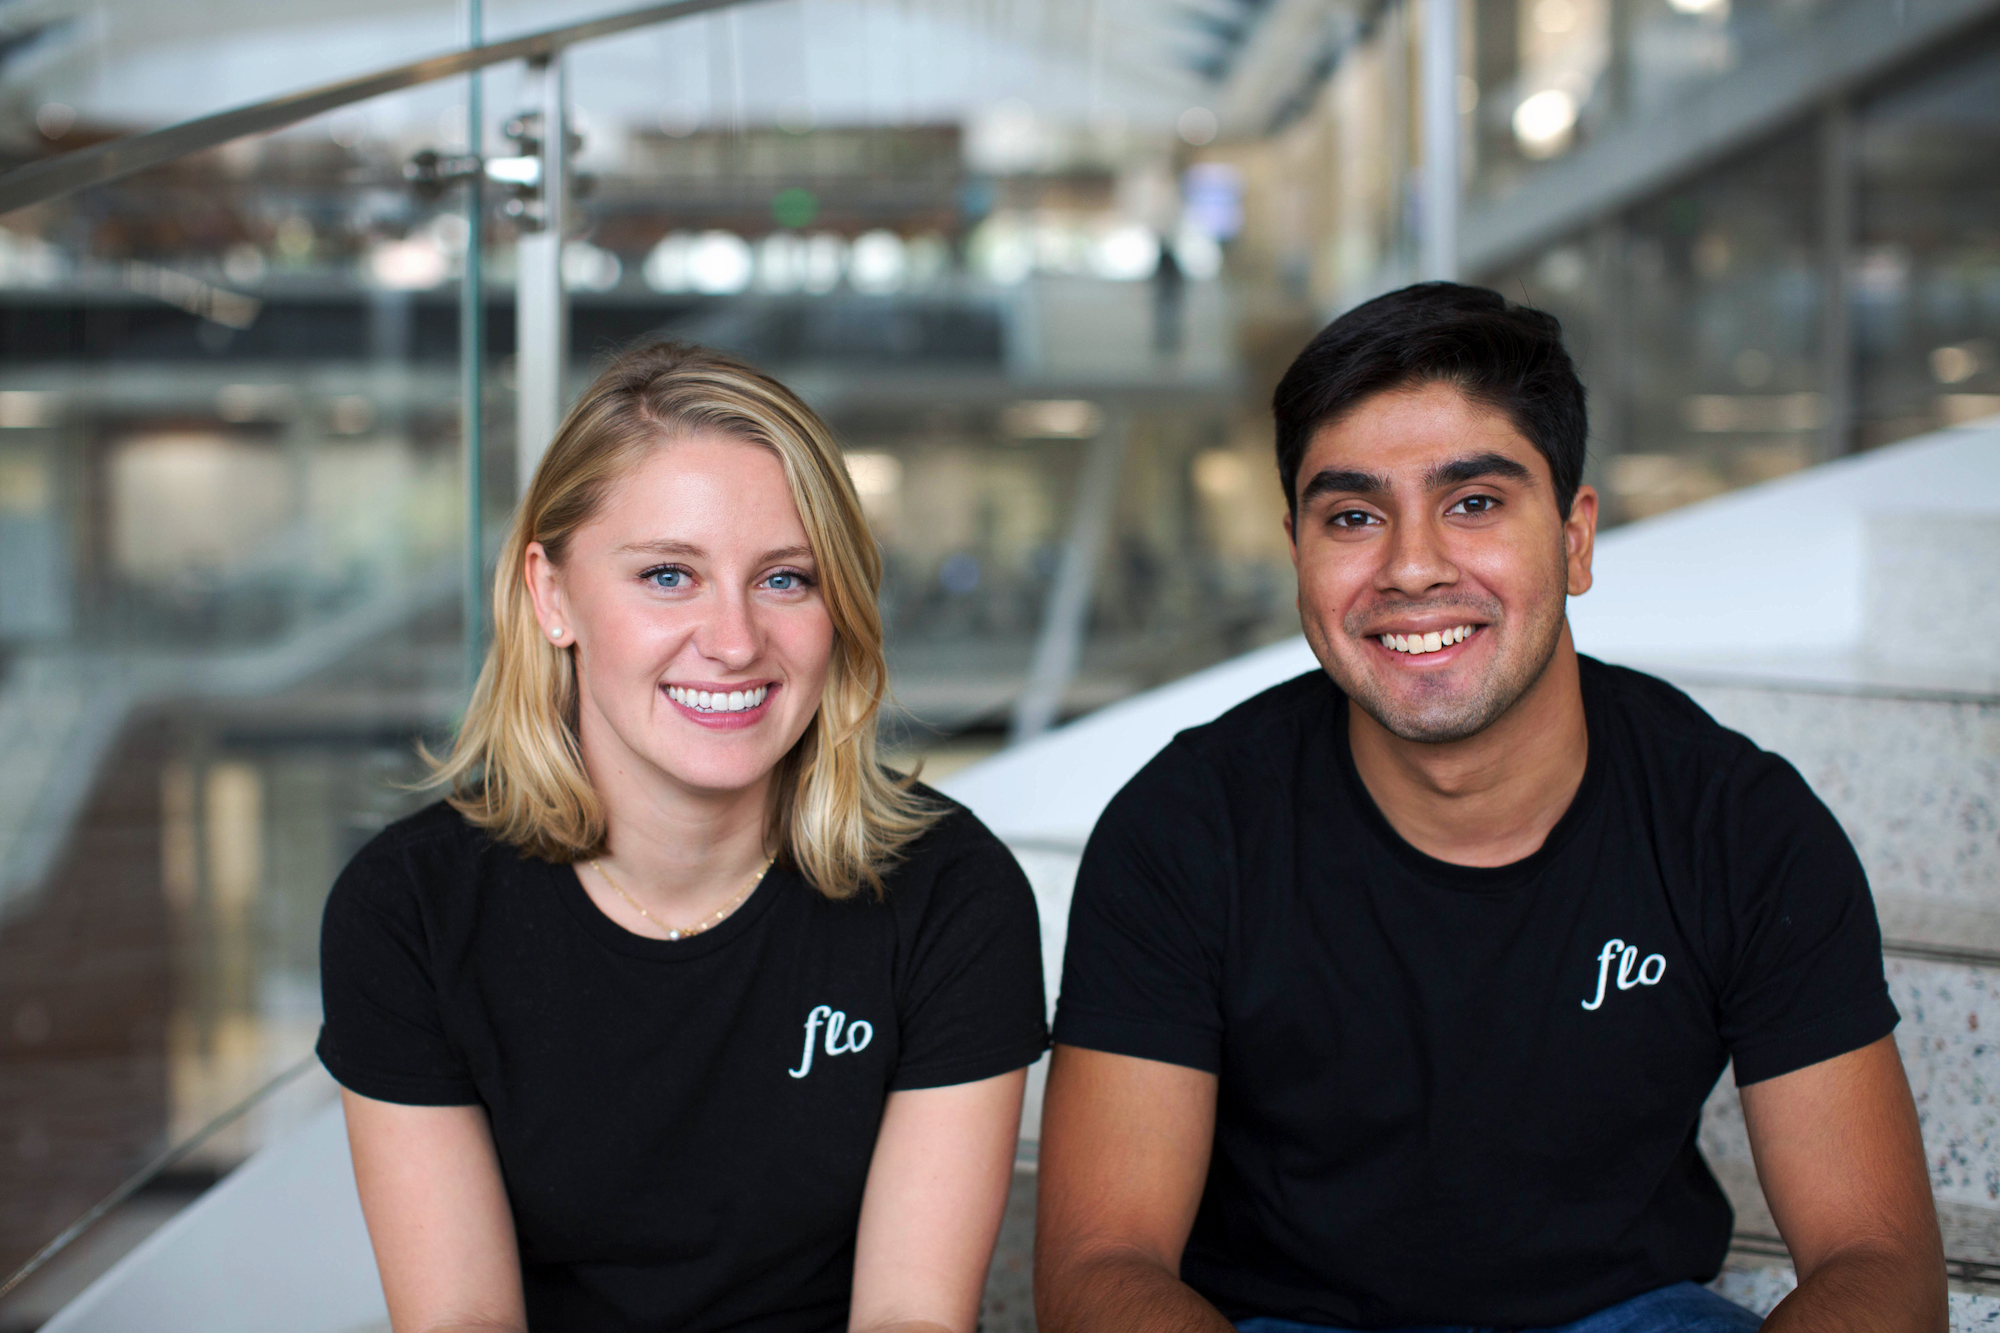 Flo Recruit's co-founders pose for a photo.